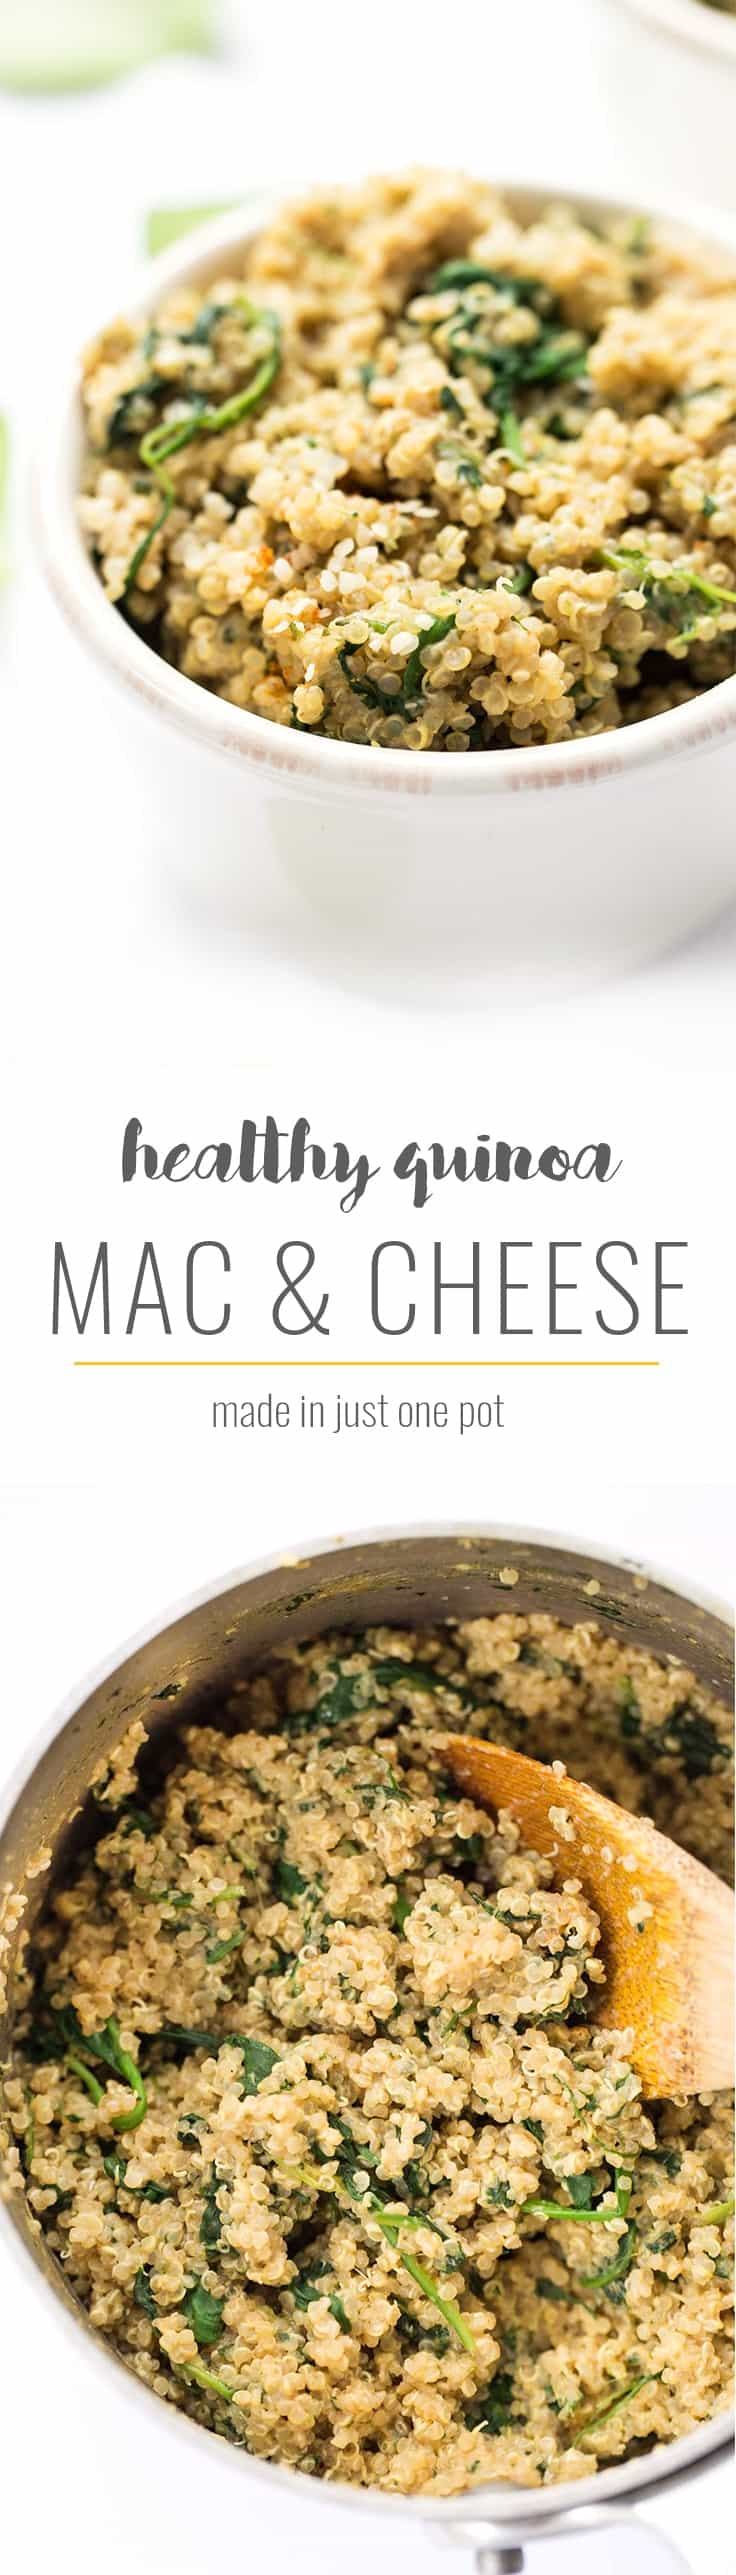 This HEALTHY Quinoa Mac and Cheese recipe is made in just one pot, is super high protein and a great way to sneak in some greens! || 340 calories, 30g protein per serving